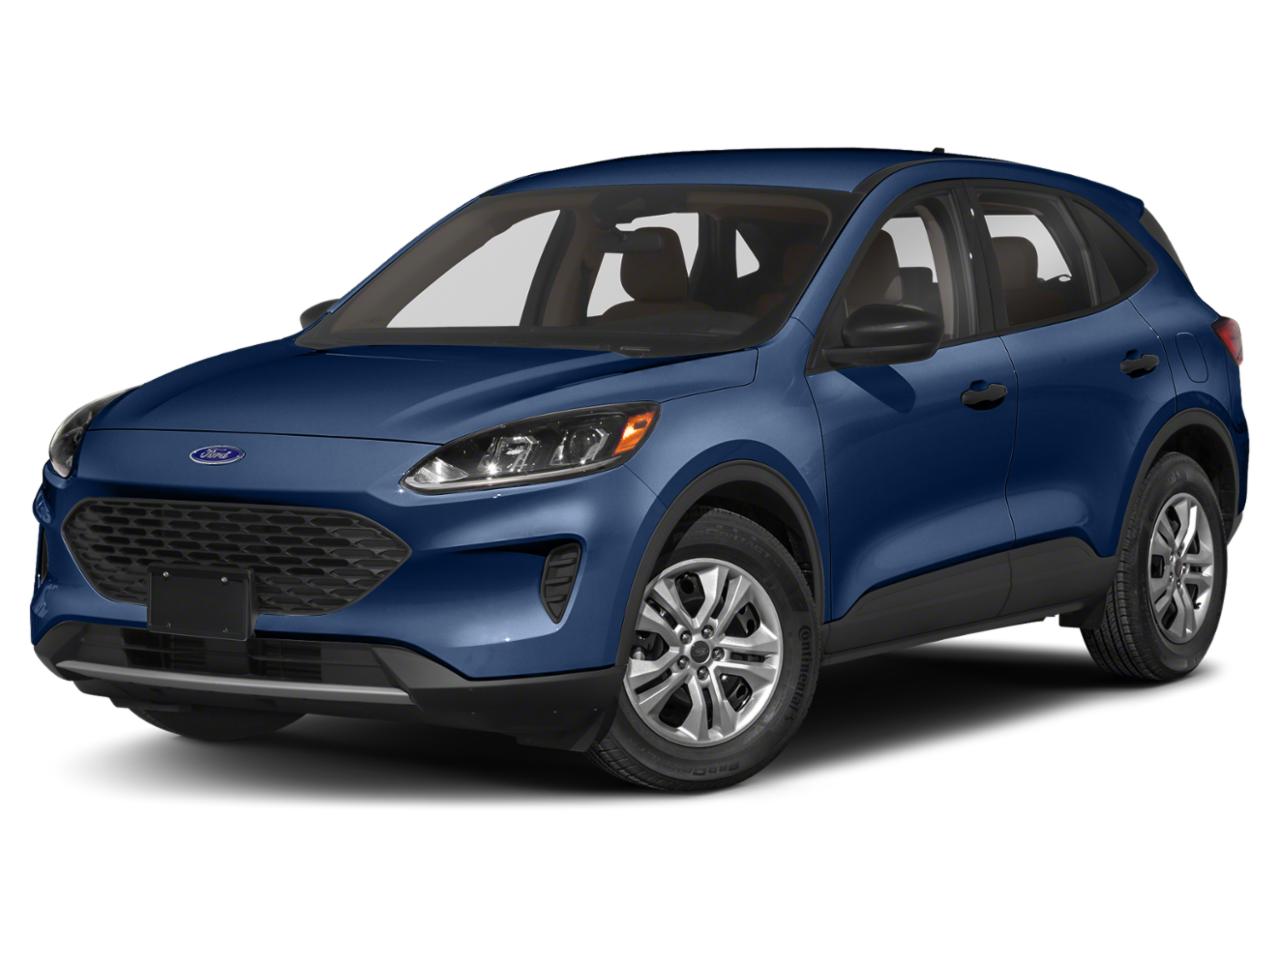 New 2022 Ford Escape for Sale at Everett Ford